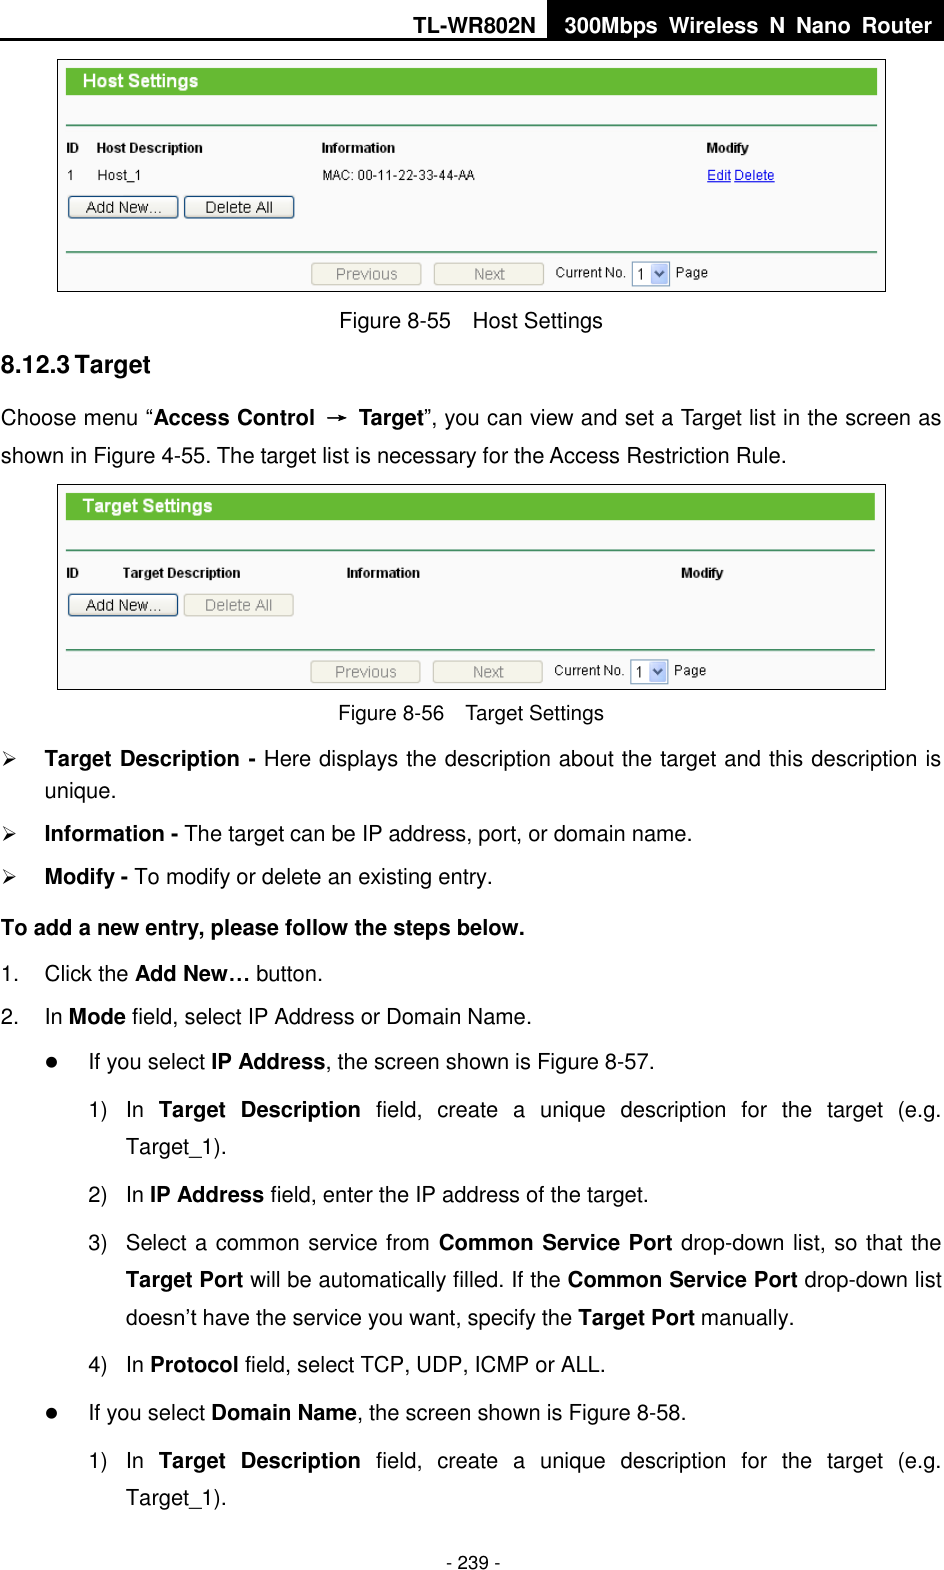 TL-WR802N 300Mbps  Wireless  N  Nano  Router  - 239 -  Figure 8-55  Host Settings 8.12.3 Target Choose menu “Access Control  →  Target”, you can view and set a Target list in the screen as shown in Figure 4-55. The target list is necessary for the Access Restriction Rule.  Figure 8-56  Target Settings  Target Description - Here displays the description about the target and this description is unique.    Information - The target can be IP address, port, or domain name.    Modify - To modify or delete an existing entry.   To add a new entry, please follow the steps below. 1.  Click the Add New… button. 2.  In Mode field, select IP Address or Domain Name.  If you select IP Address, the screen shown is Figure 8-57.   1)  In  Target  Description  field,  create  a  unique  description  for  the  target  (e.g. Target_1). 2)  In IP Address field, enter the IP address of the target. 3)  Select a common service from Common Service Port drop-down list, so that the Target Port will be automatically filled. If the Common Service Port drop-down list doesn’t have the service you want, specify the Target Port manually. 4)  In Protocol field, select TCP, UDP, ICMP or ALL.   If you select Domain Name, the screen shown is Figure 8-58. 1)  In  Target  Description  field,  create  a  unique  description  for  the  target  (e.g. Target_1). 